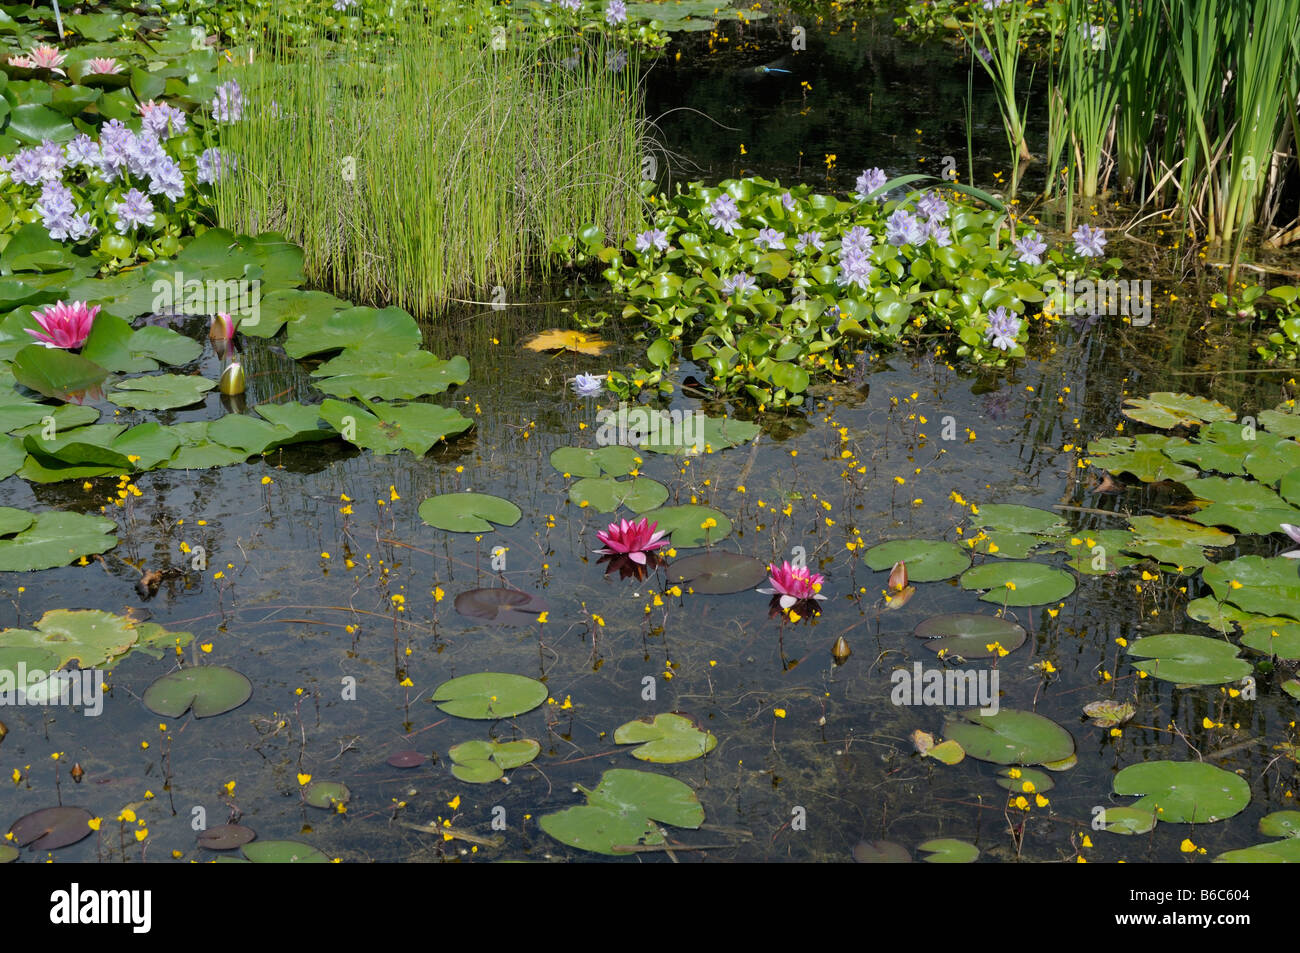 Pond with Water Hyazinths, Waterlilies and Fringed Waterlilies Stock Photo